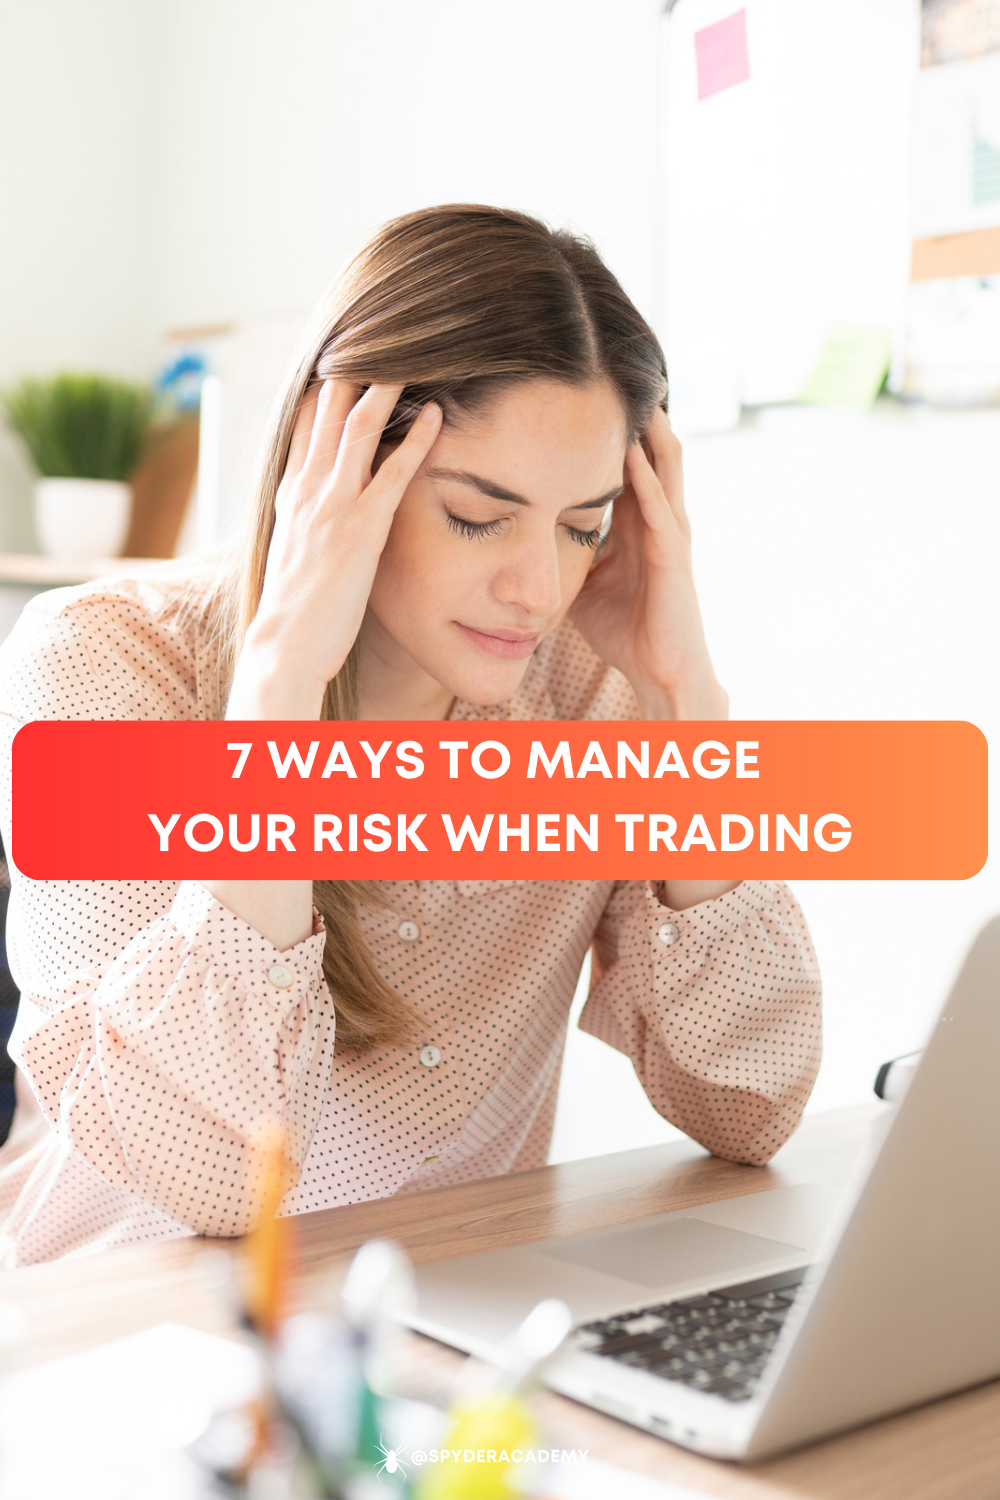 Risk management in trading refers to the identification, analysis, and acceptance or mitigation of trading risks. It is an essential component of your broader trading strategy, aimed at minimizing potential losses.